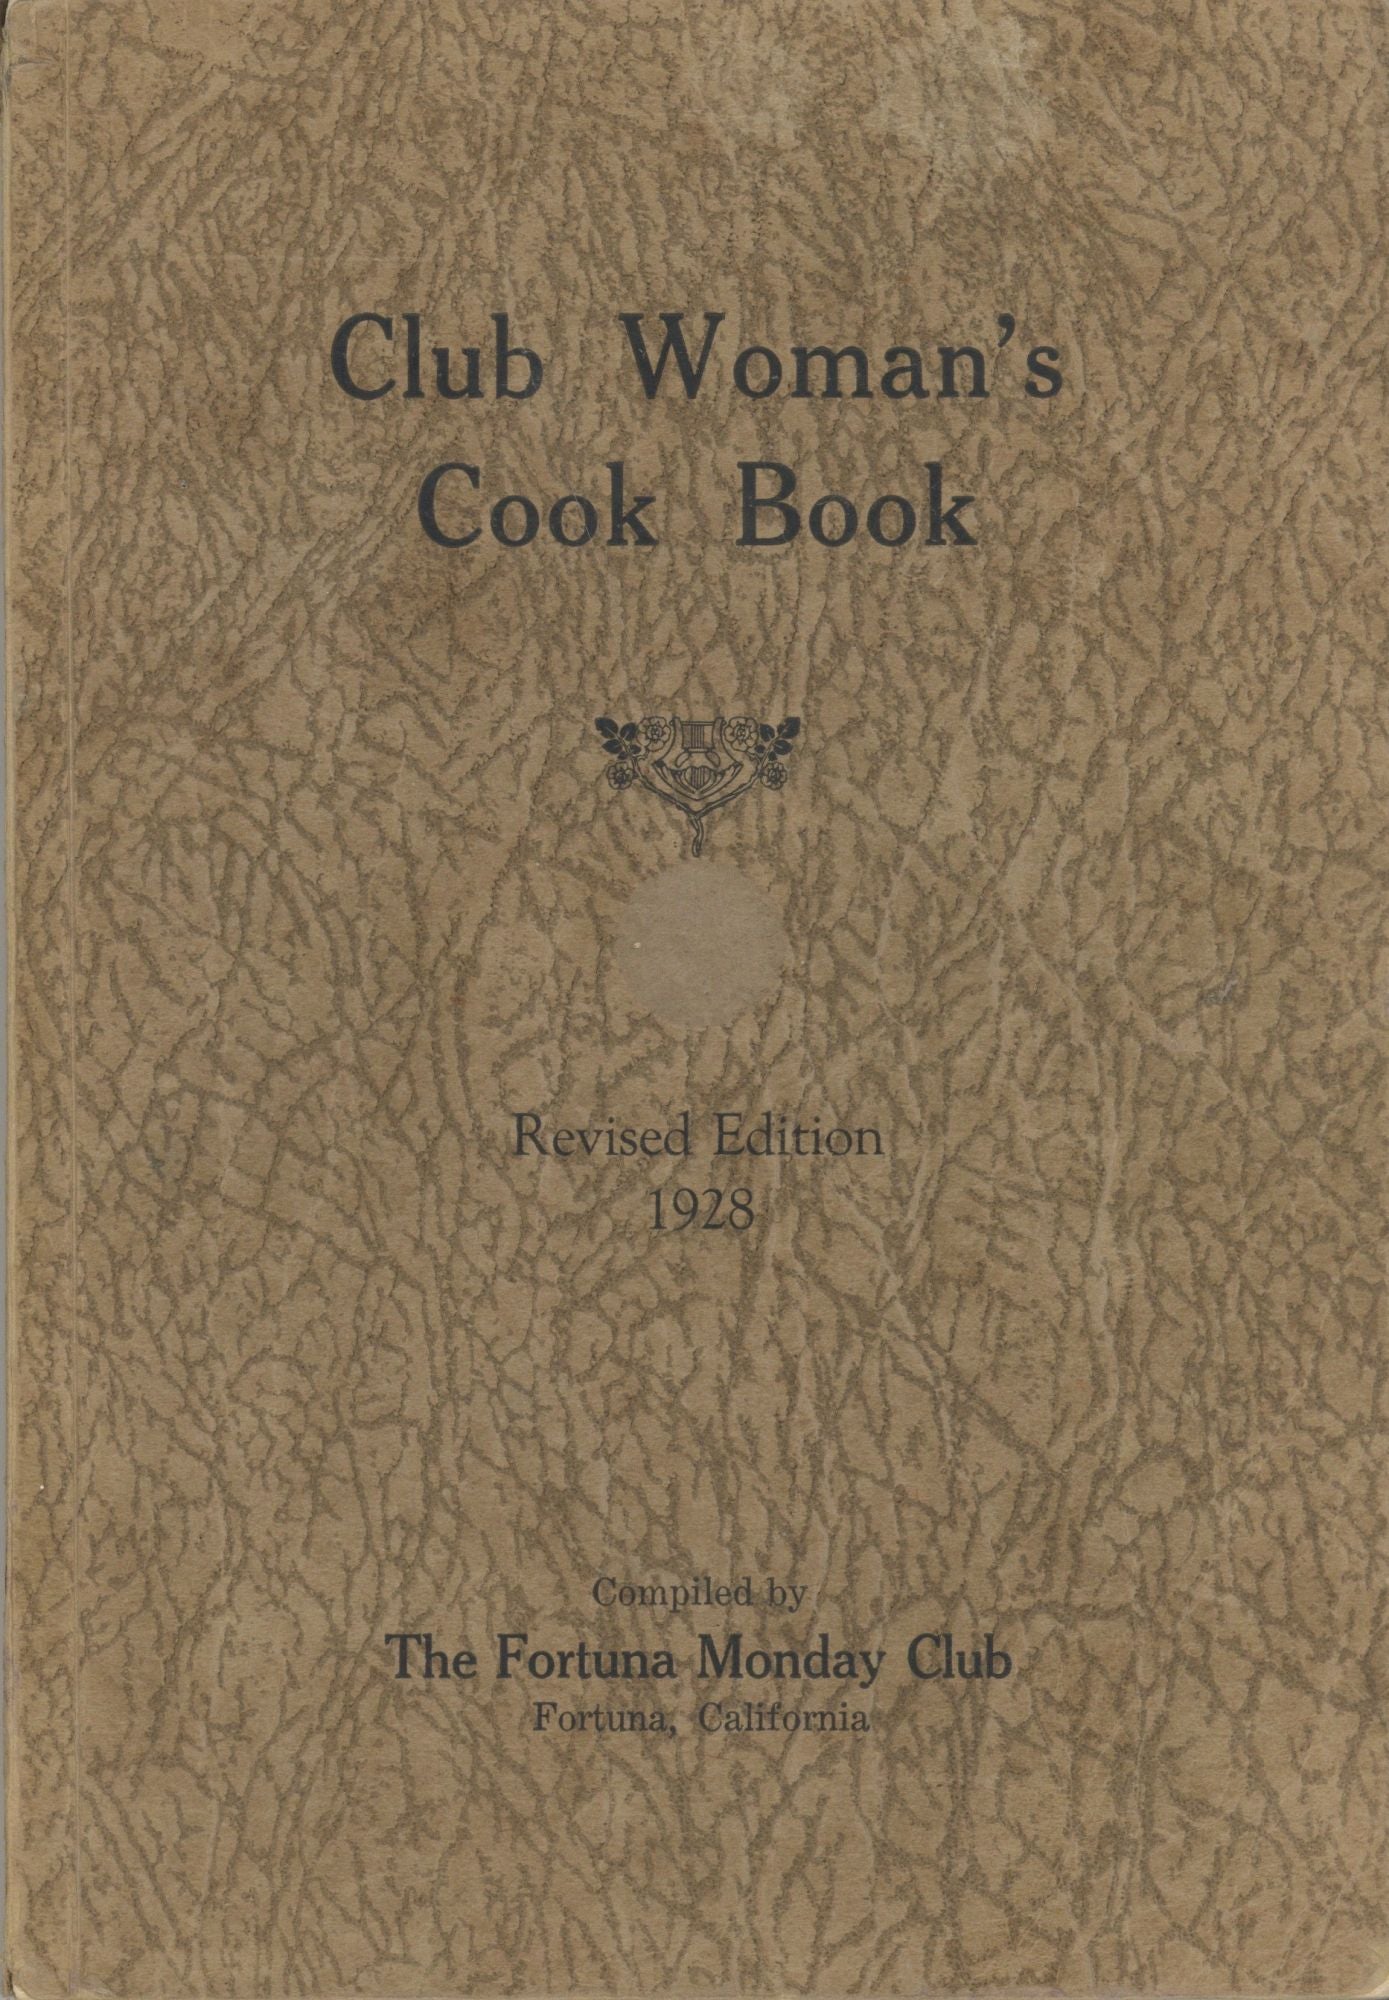 Item #5490 Club Woman's Cook Book. Compiled by The Fortuna Monday Club. Revised edition. Fortuna Monday Club . Committee in Charge, Calif Fortuna.